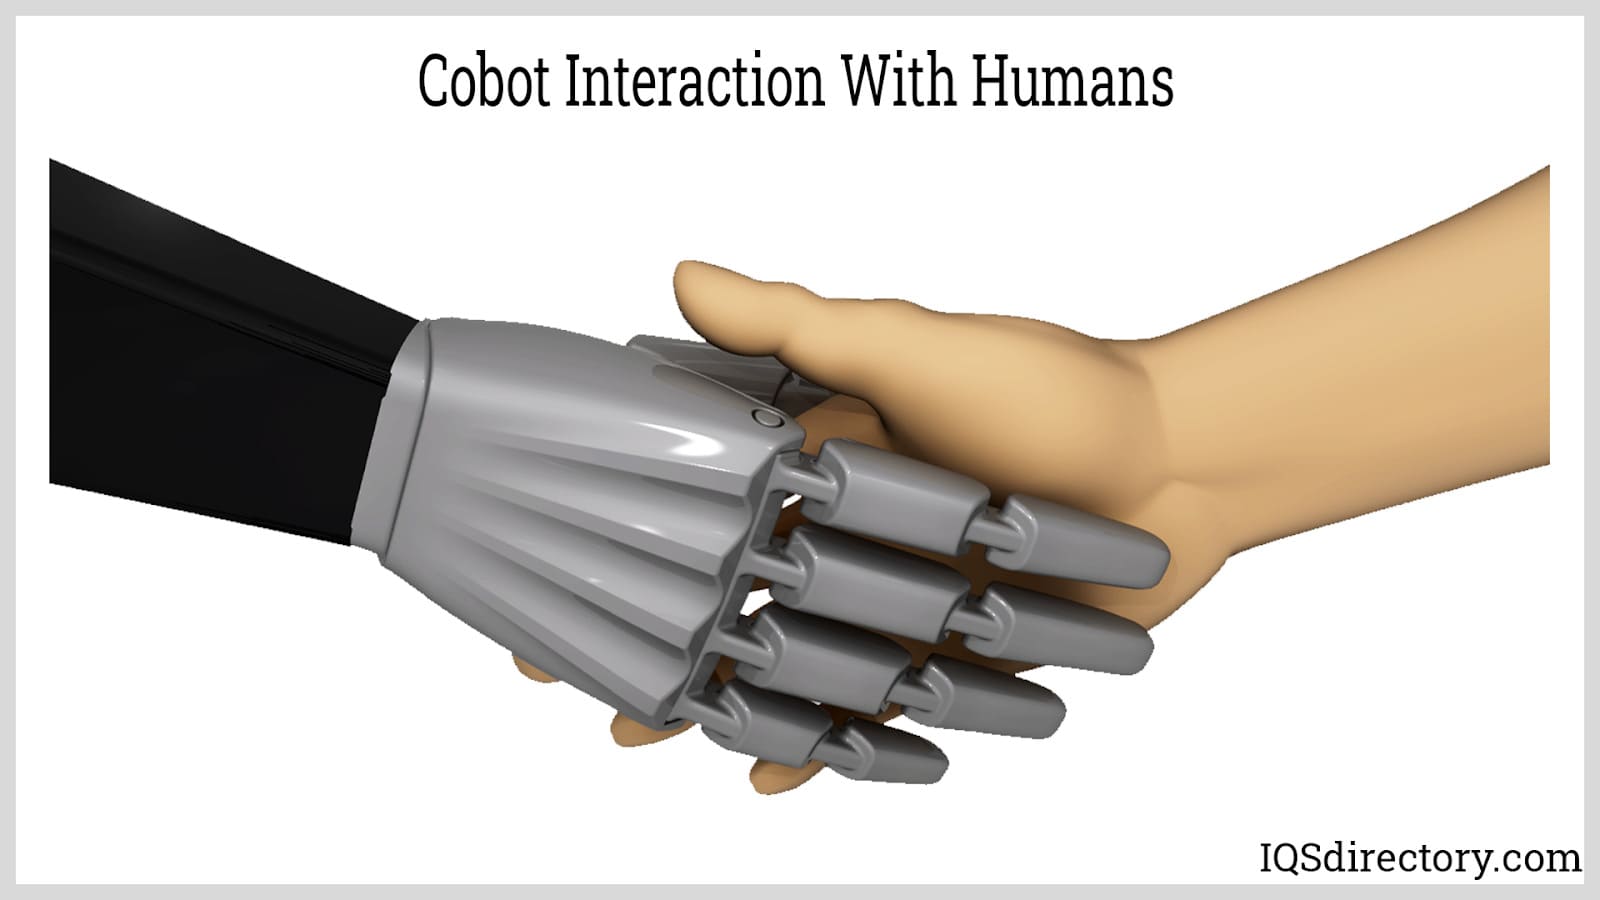  Cobot Interaction With Humans